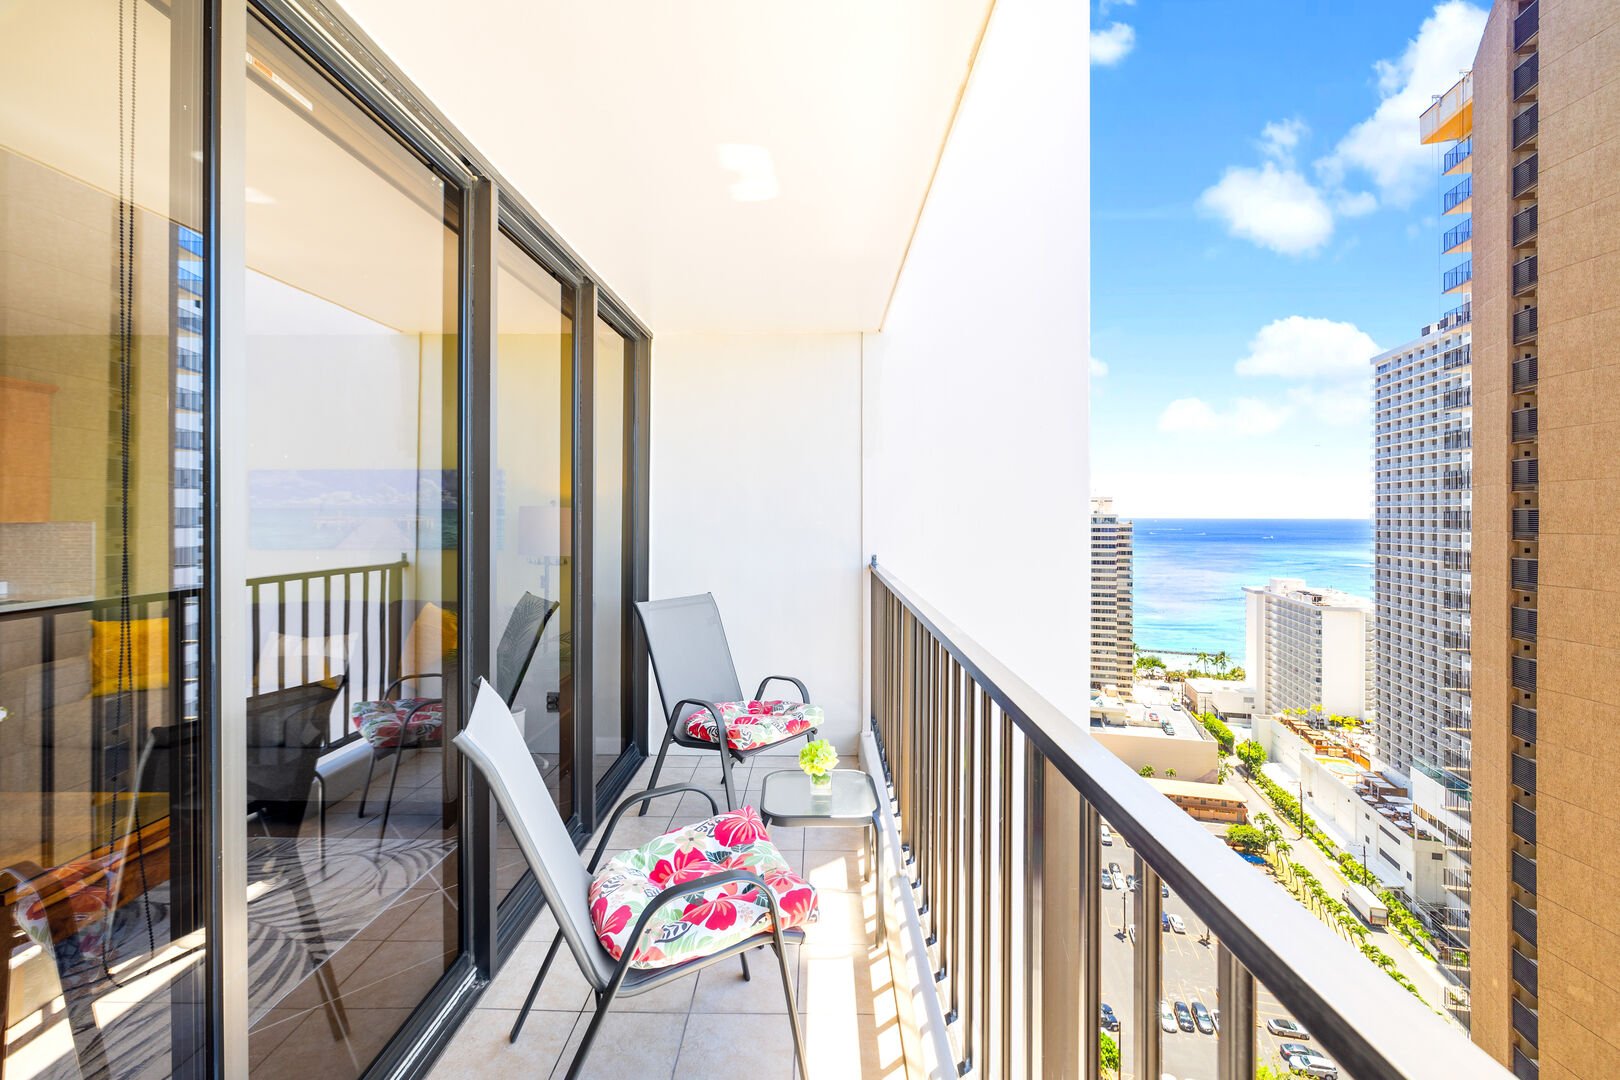 Have your coffee in your lanai with stunning ocean views.